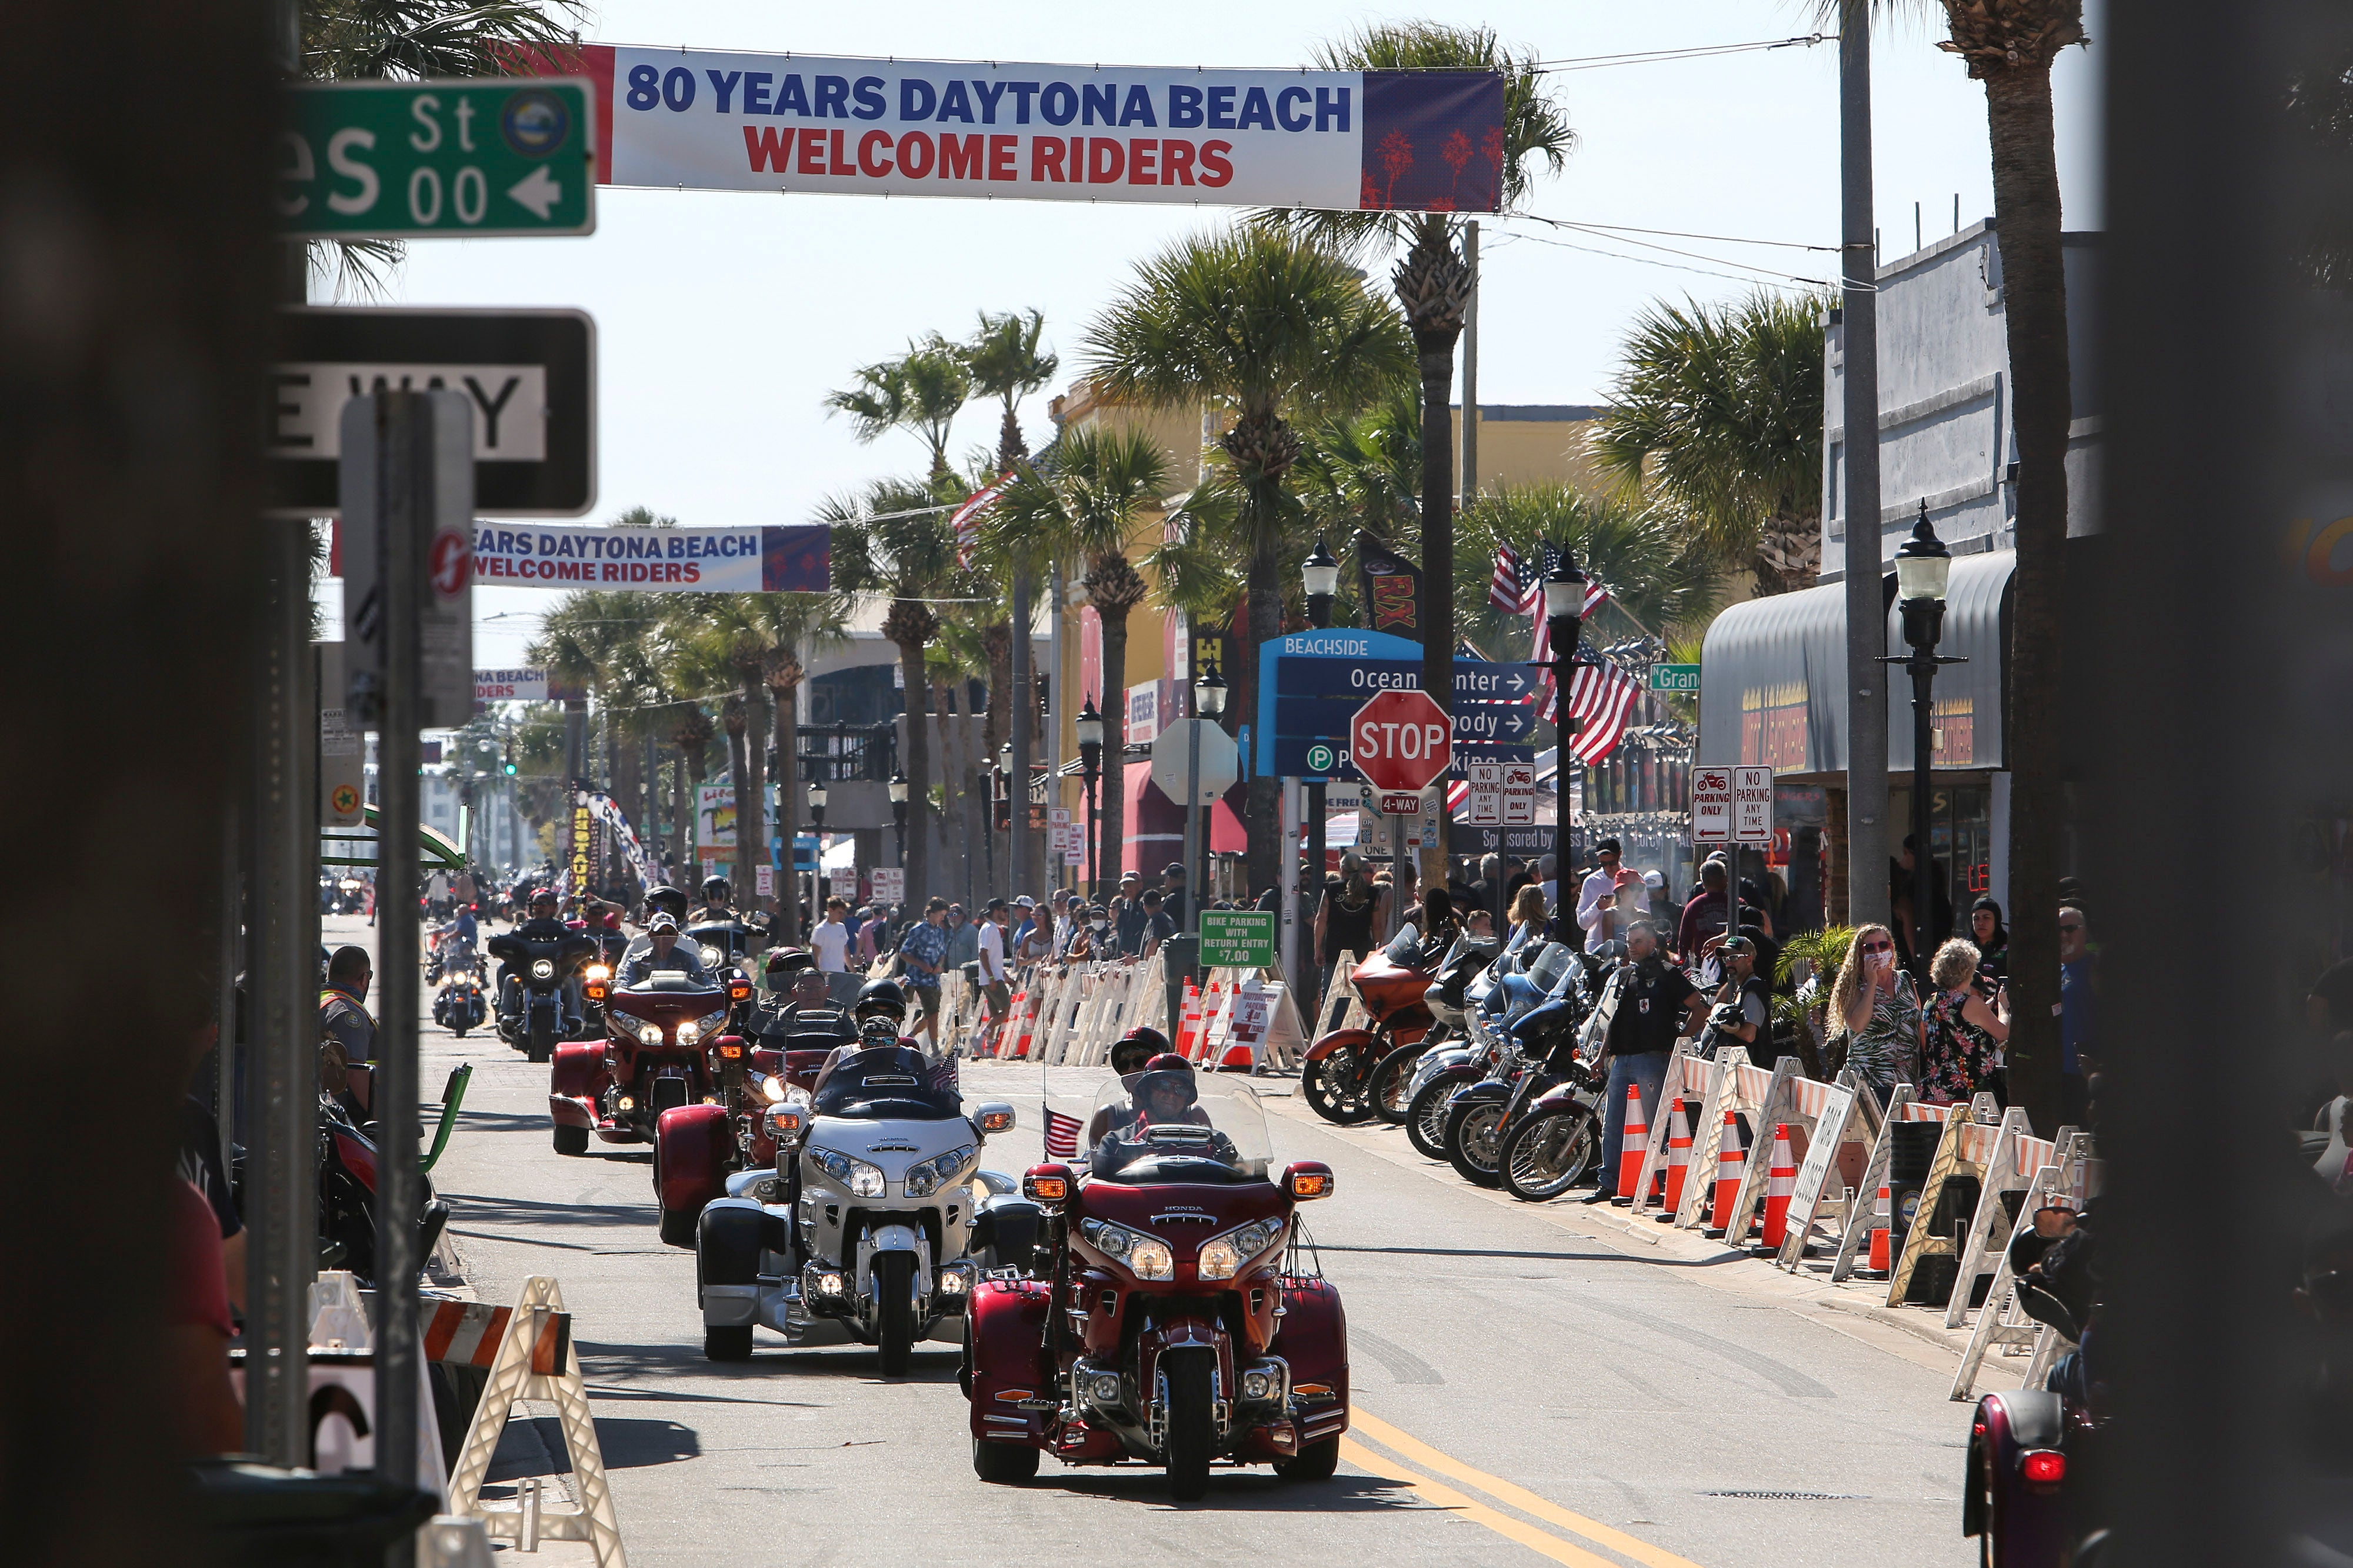 Daytona Beach prepares for tens of thousands of cyclists to ride inside the city